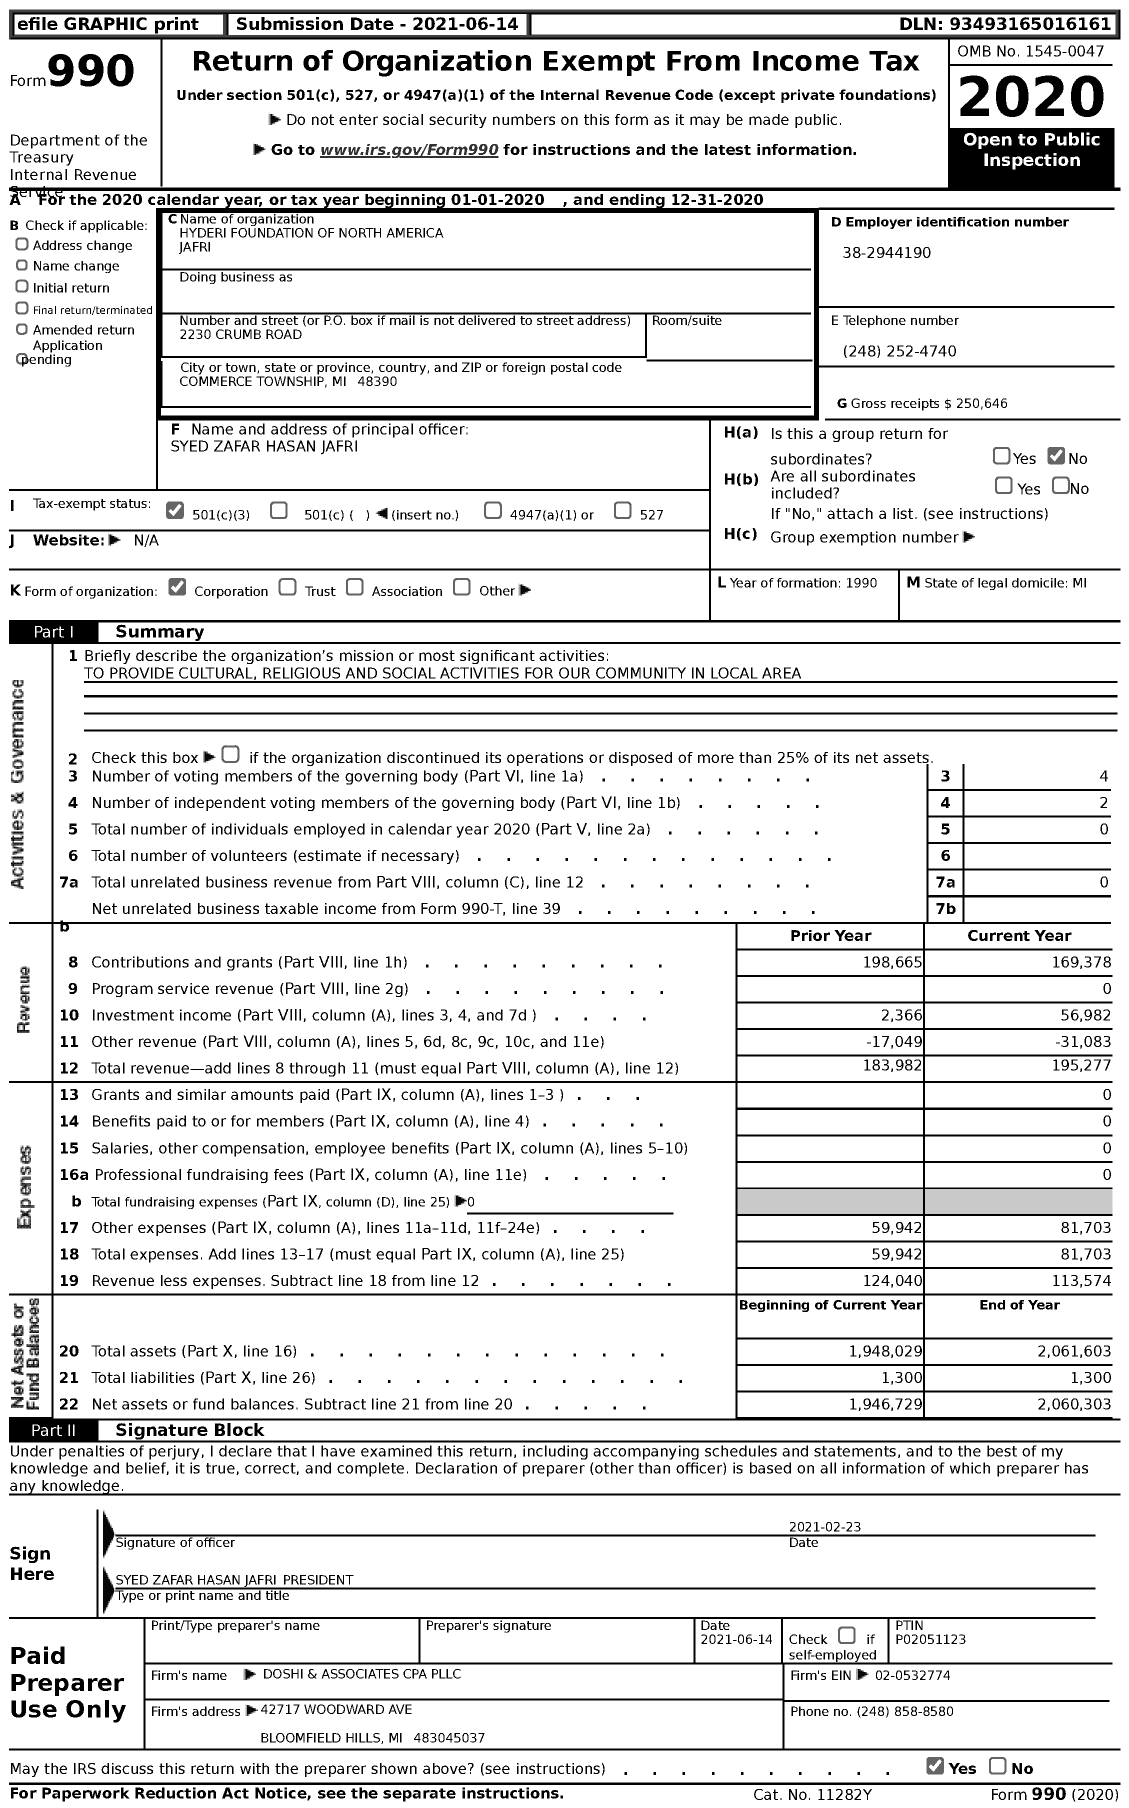 Image of first page of 2020 Form 990 for Hyderi Foundation of North America Jafri